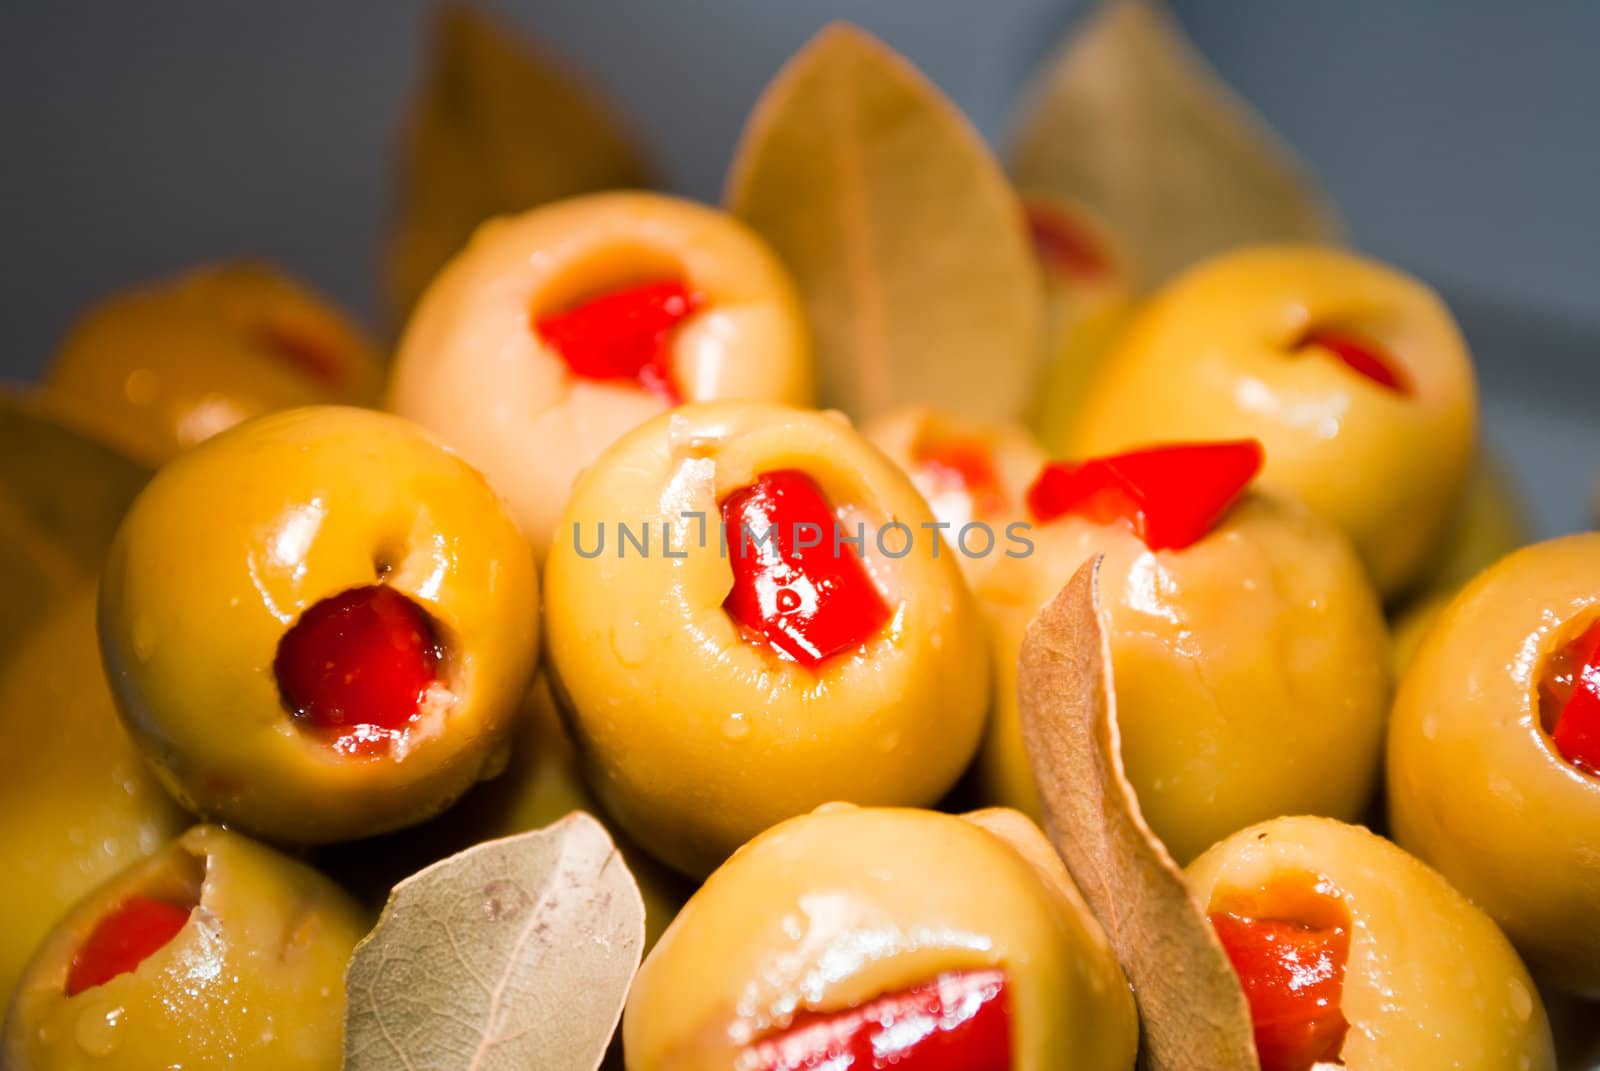 Green olives stuffed with red pepper by betterinall